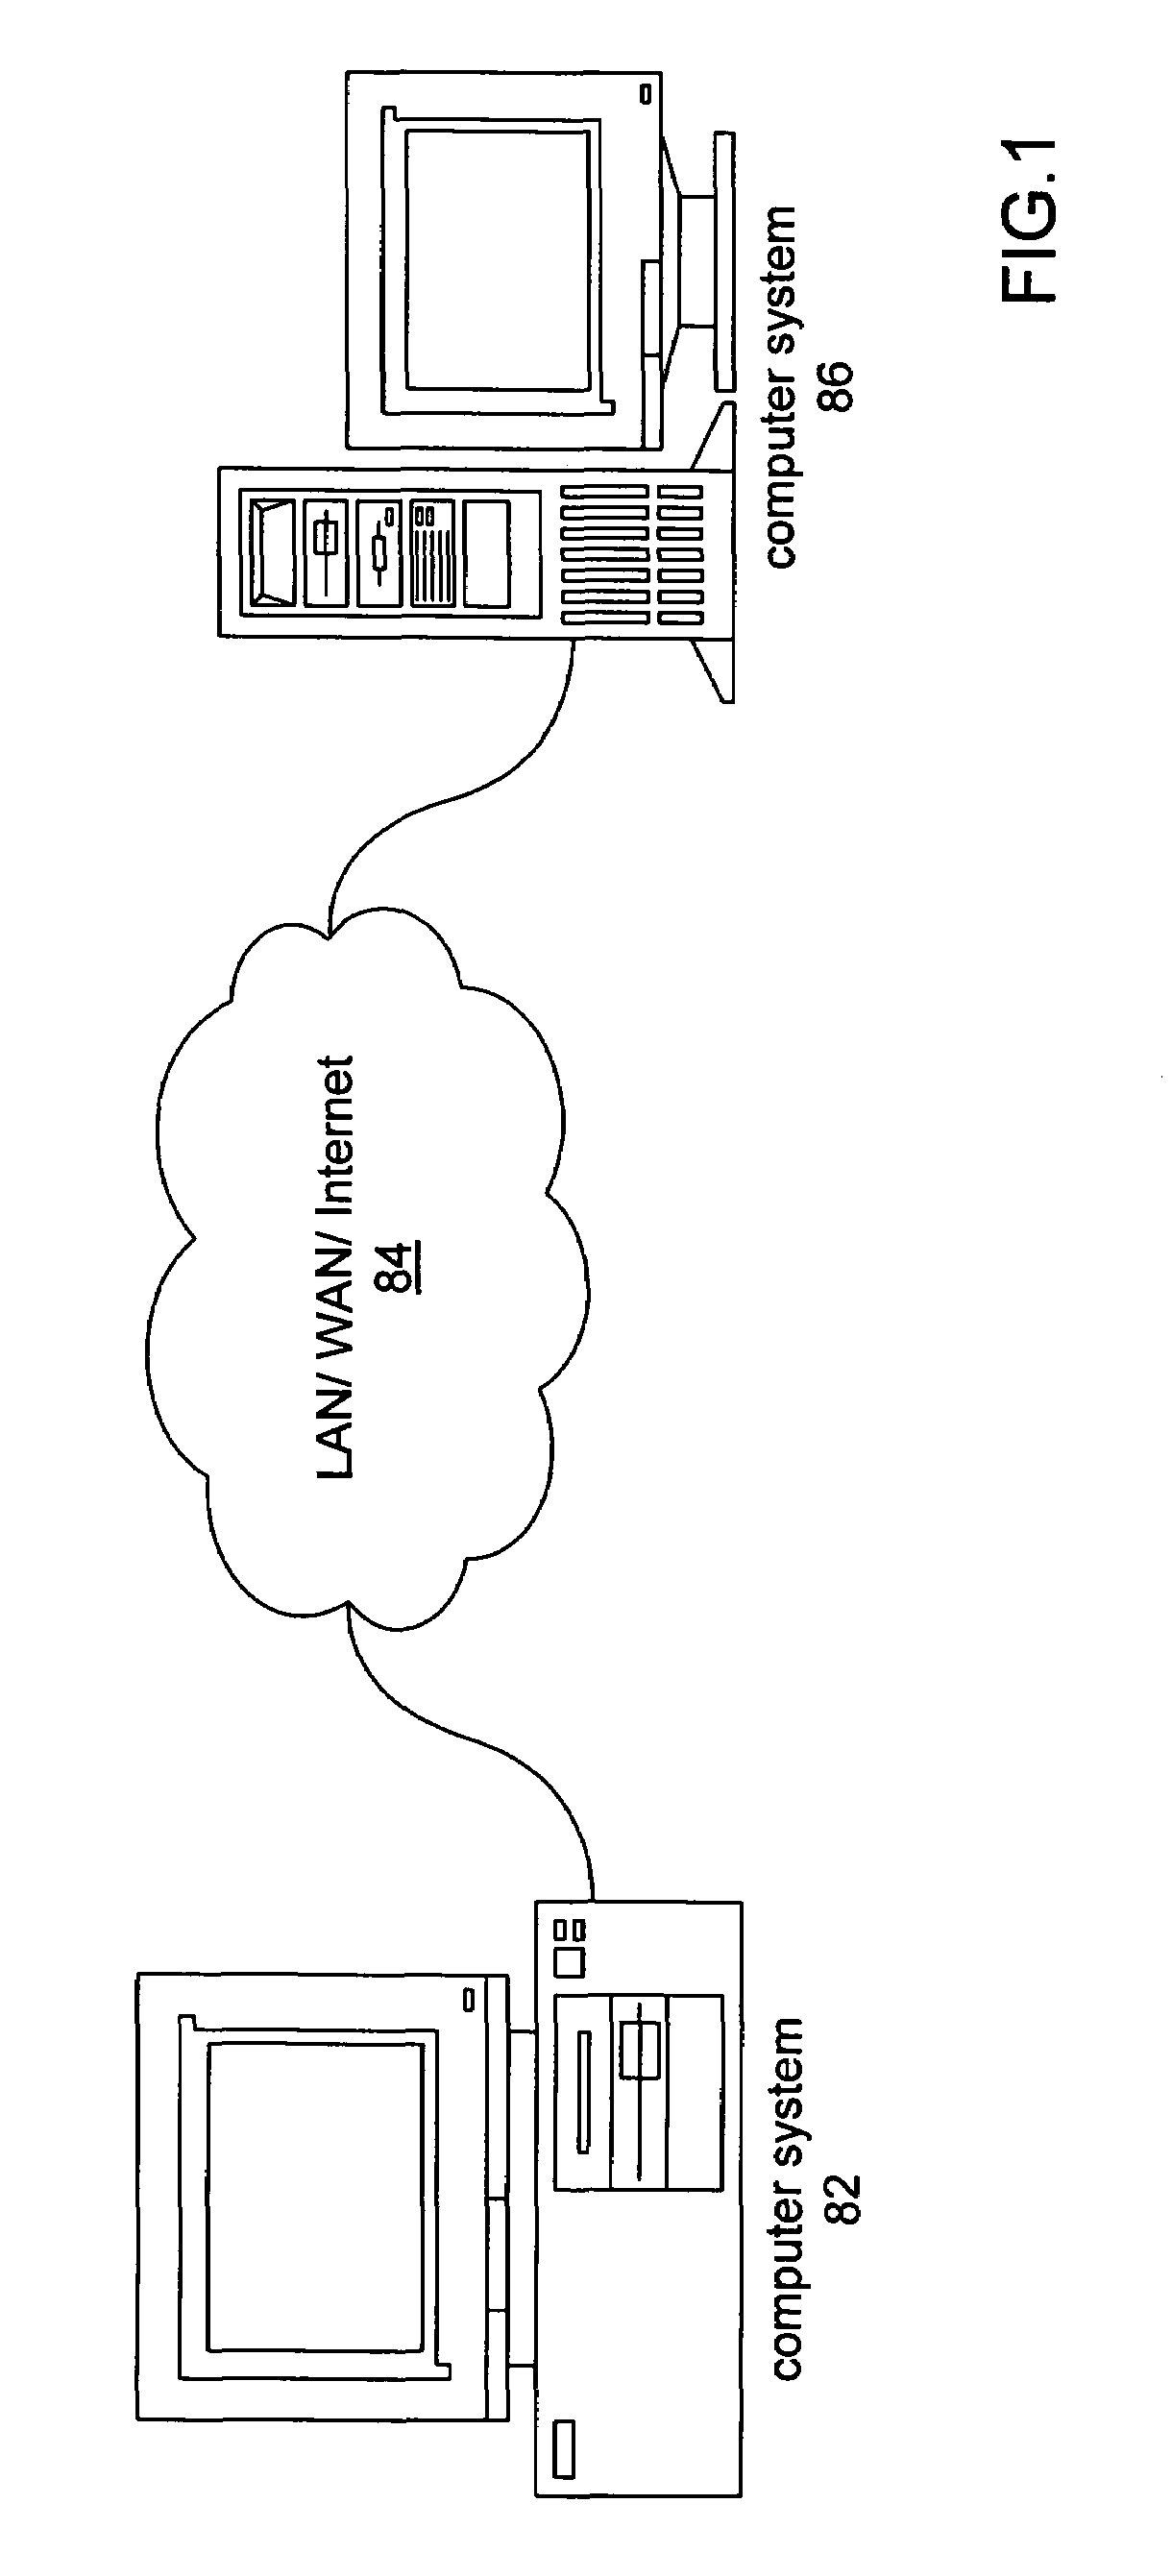 System and method for programmatically modifying a graphical program in response to program information